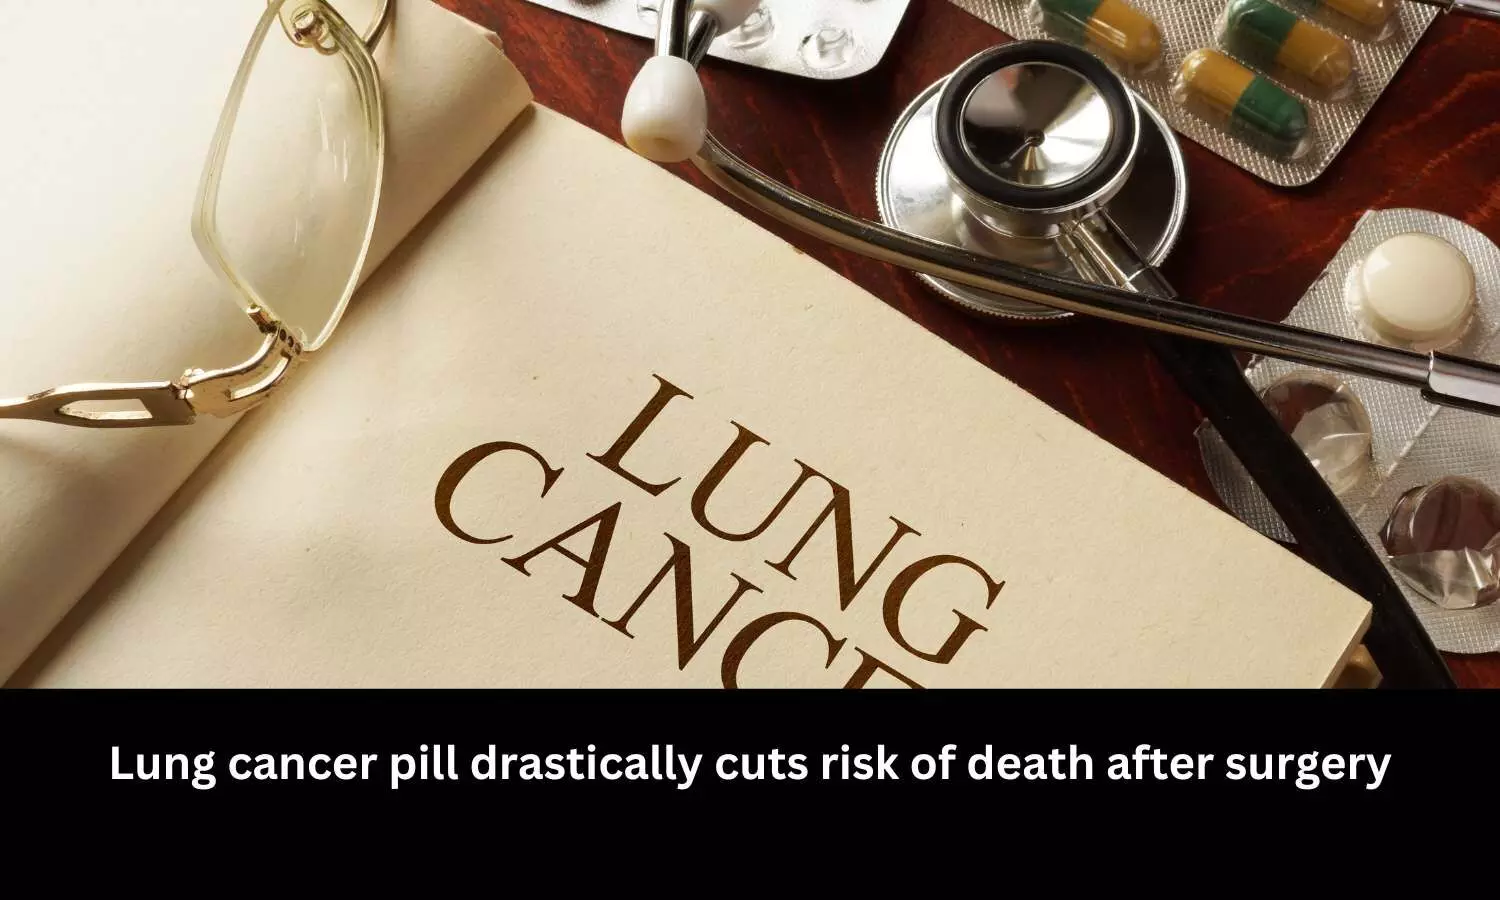 Lung cancer pill drastically cuts risk of death after surgery